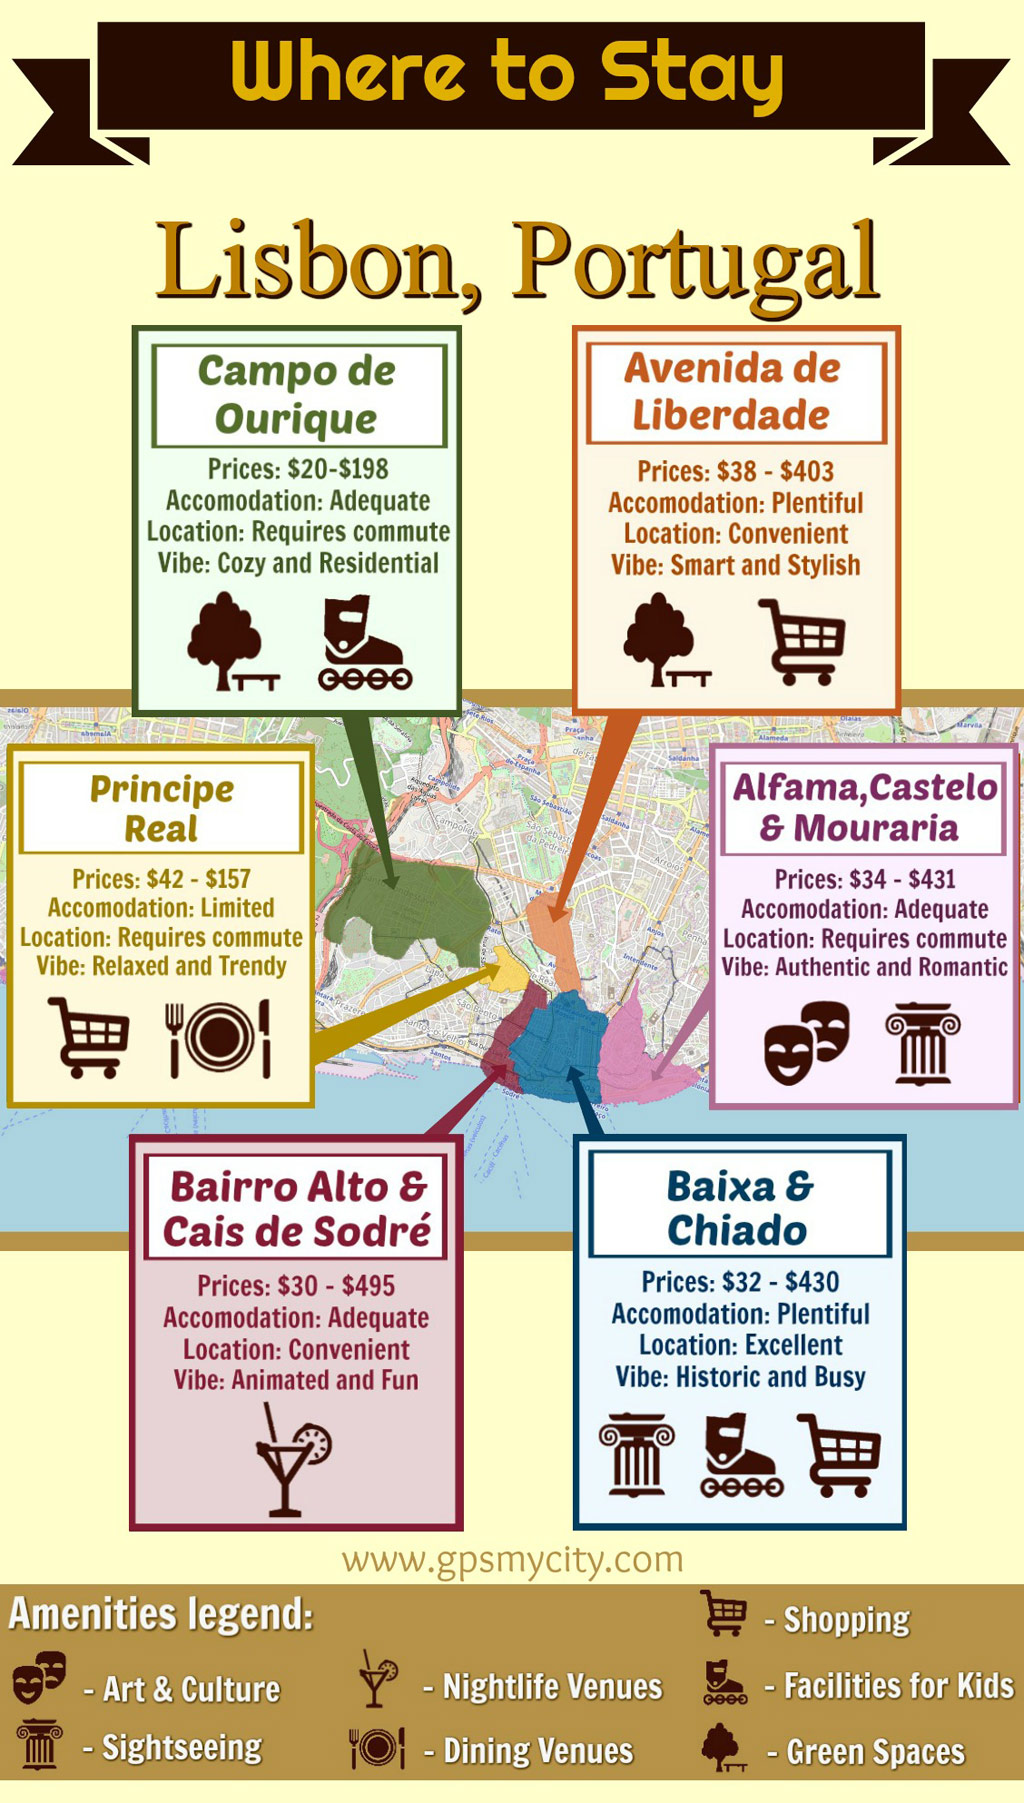 Where To Stay in Lisbon - Guide of Best Areas - GPSmyCity